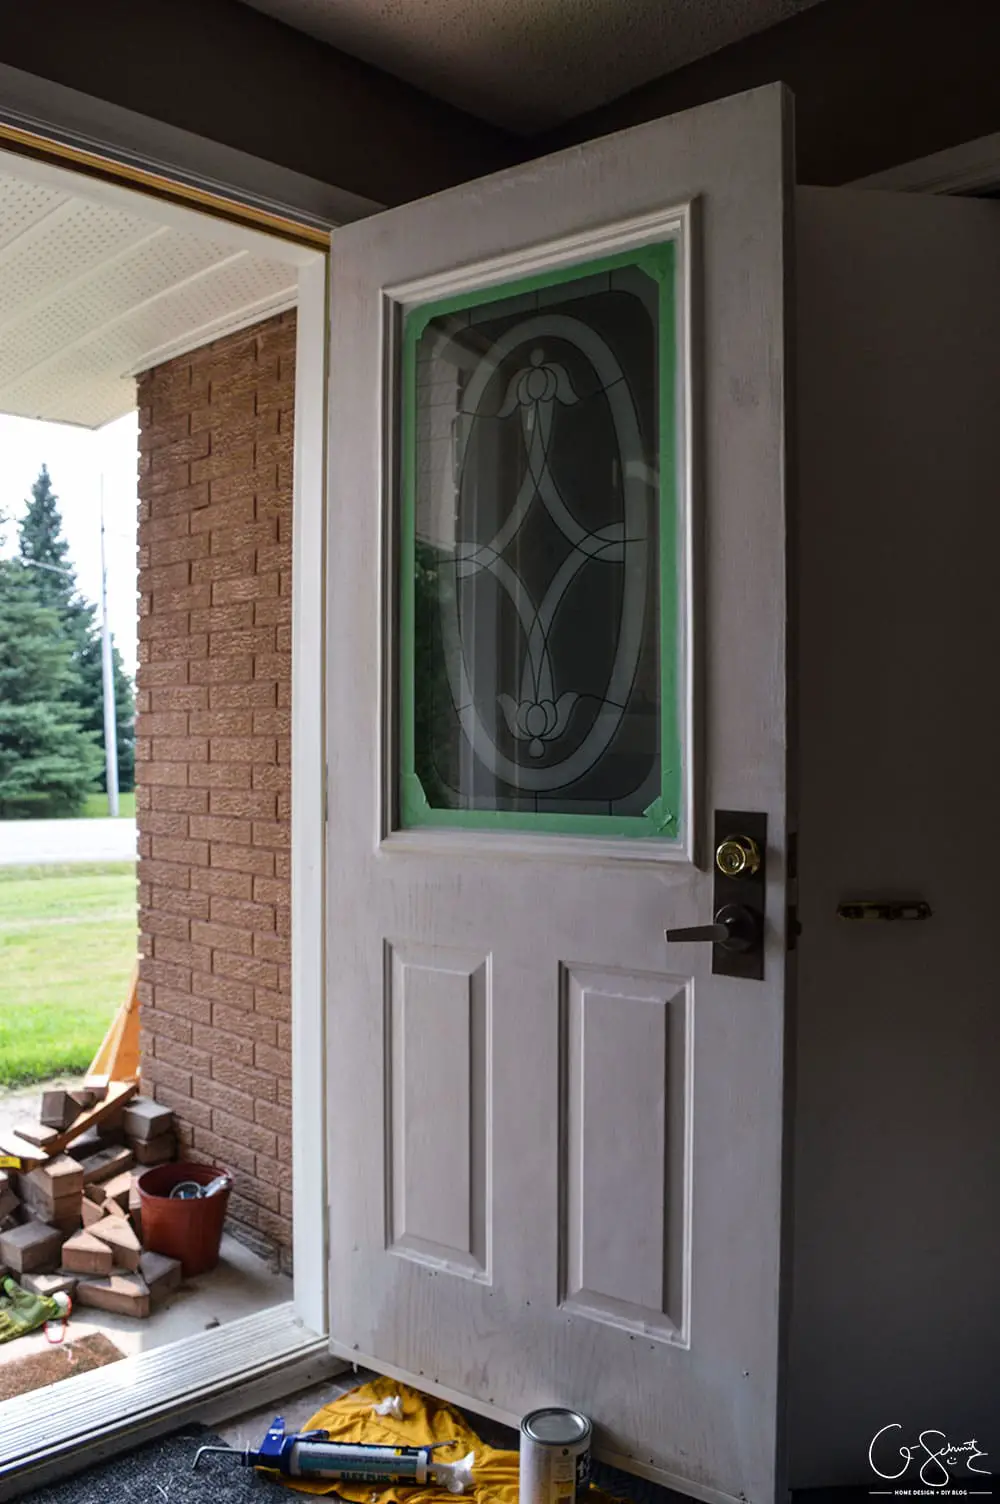 Thinking of updating your front door? In less than a day you can create some major impact for minimal effort. So go ahead and paint the front door any colour you want!